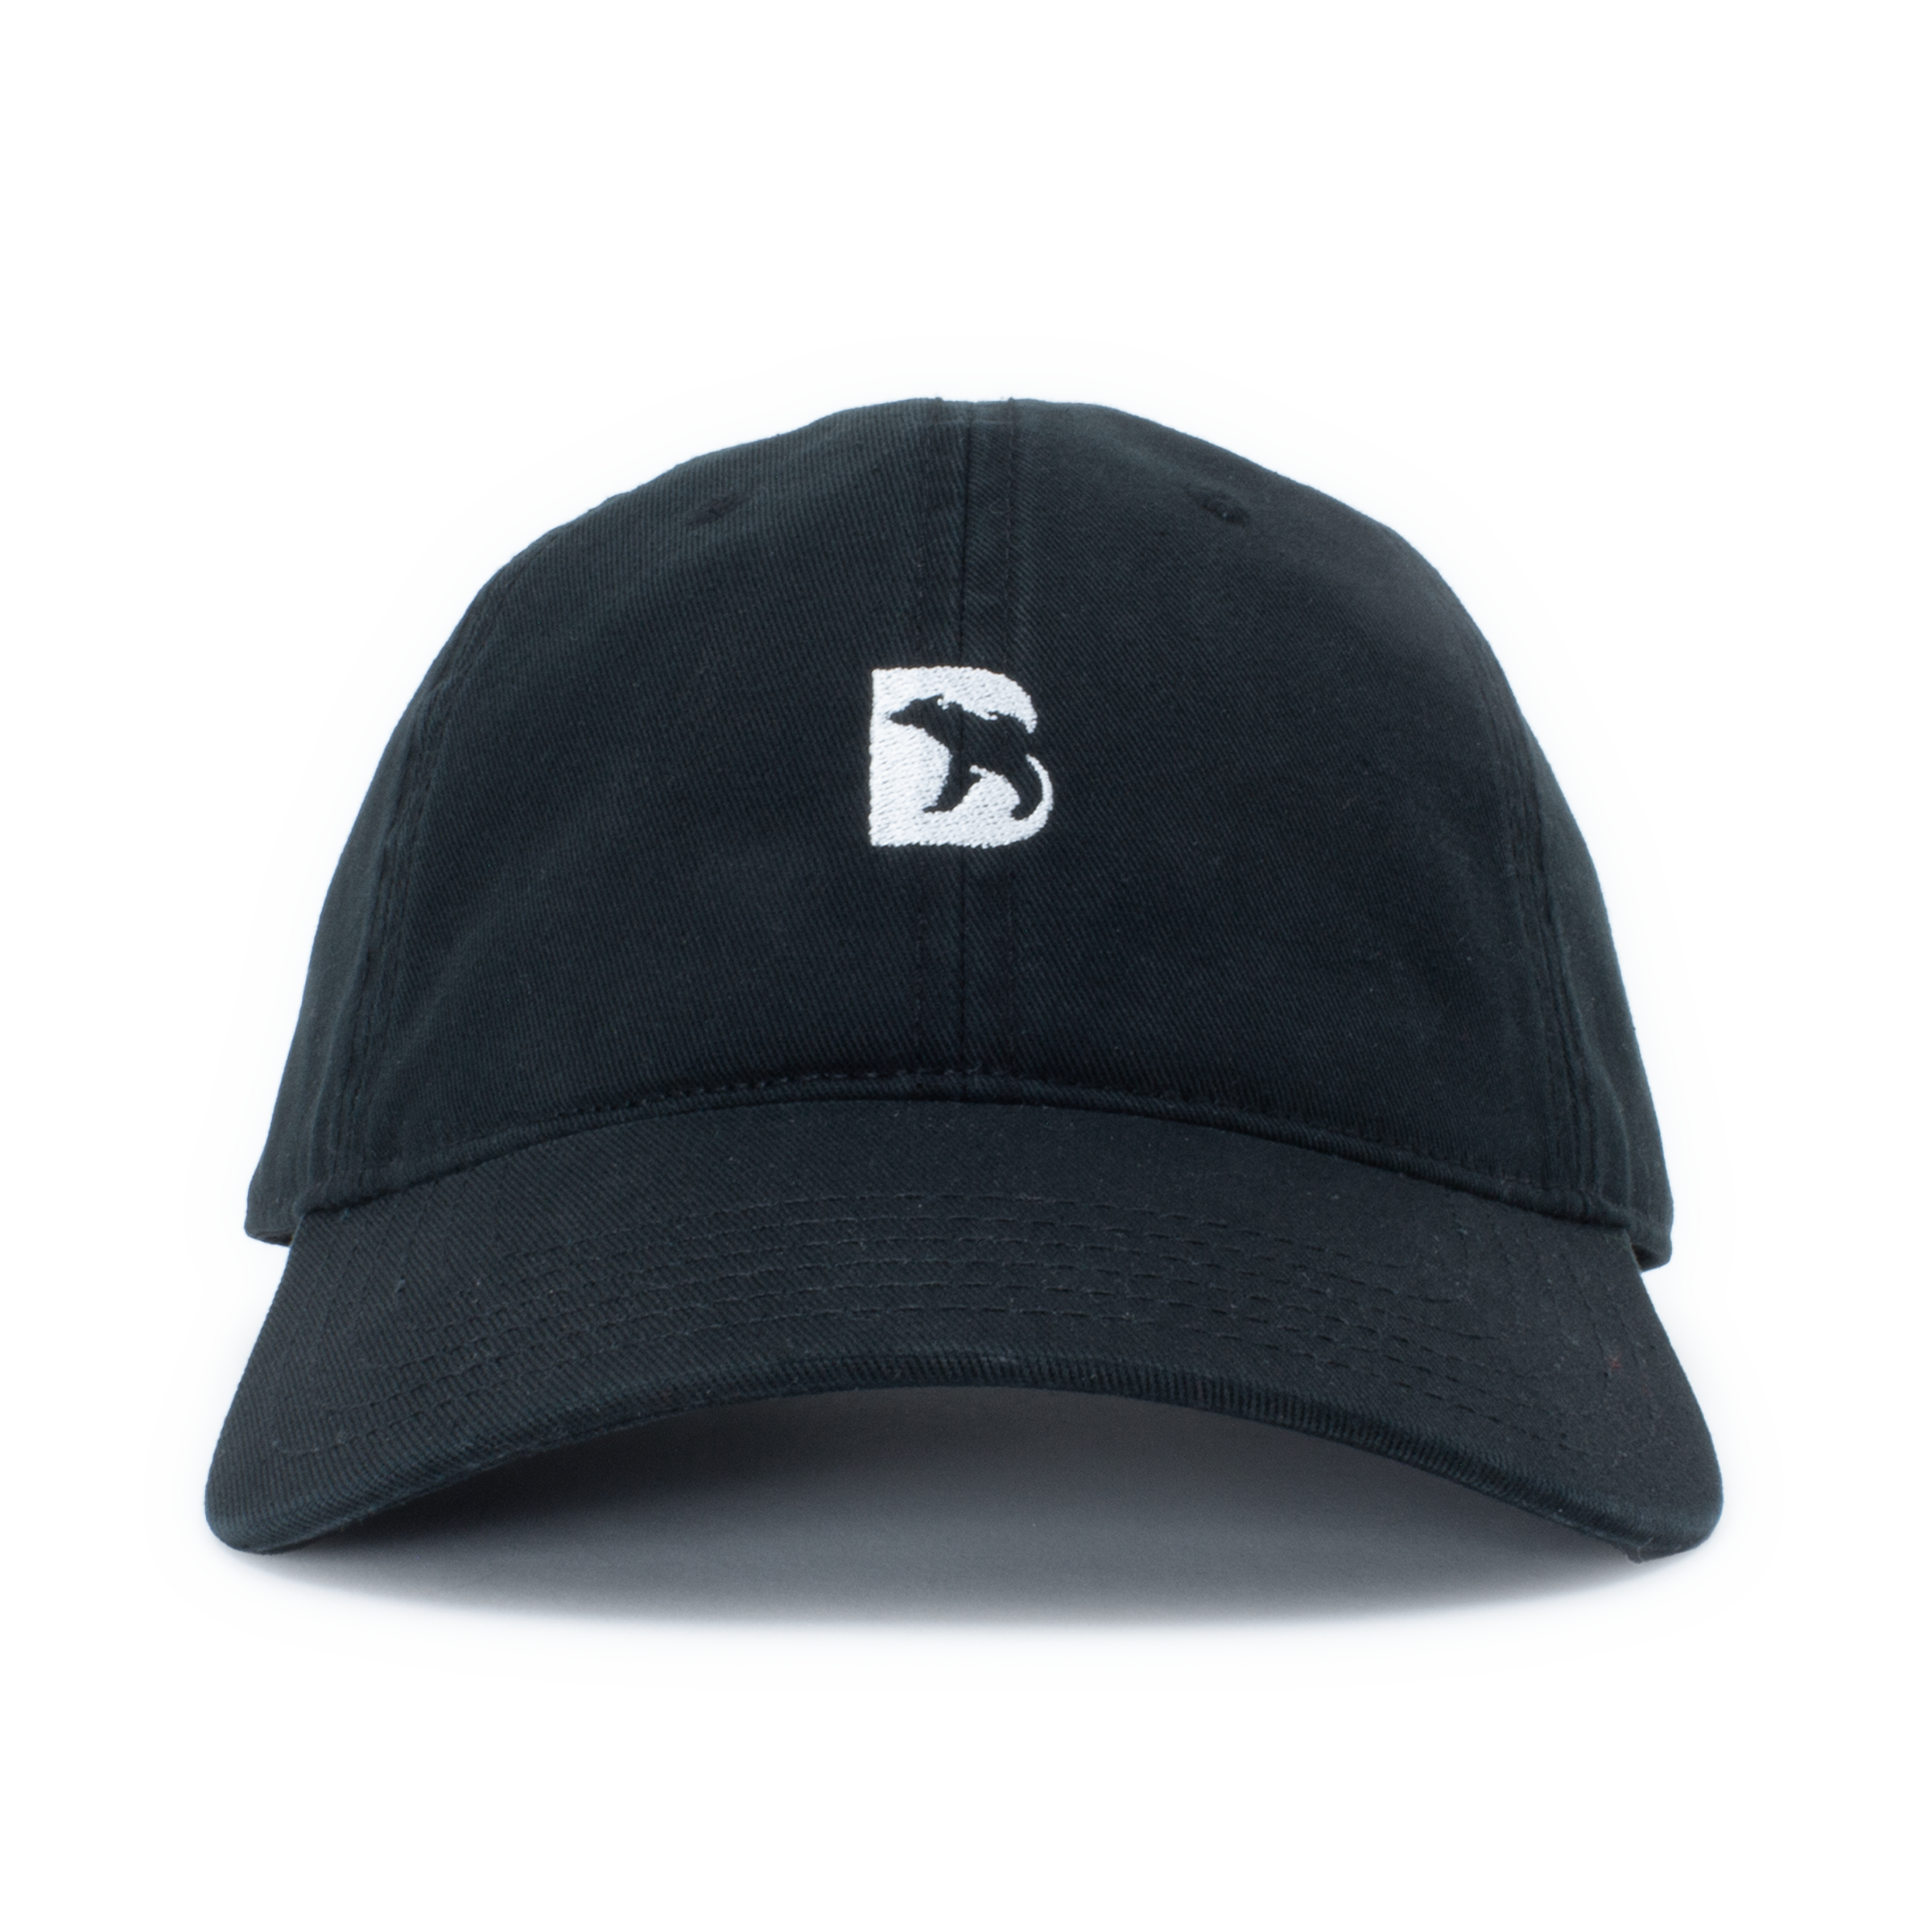 Bearbottom Dad Hat Black front with embroidered white B logo